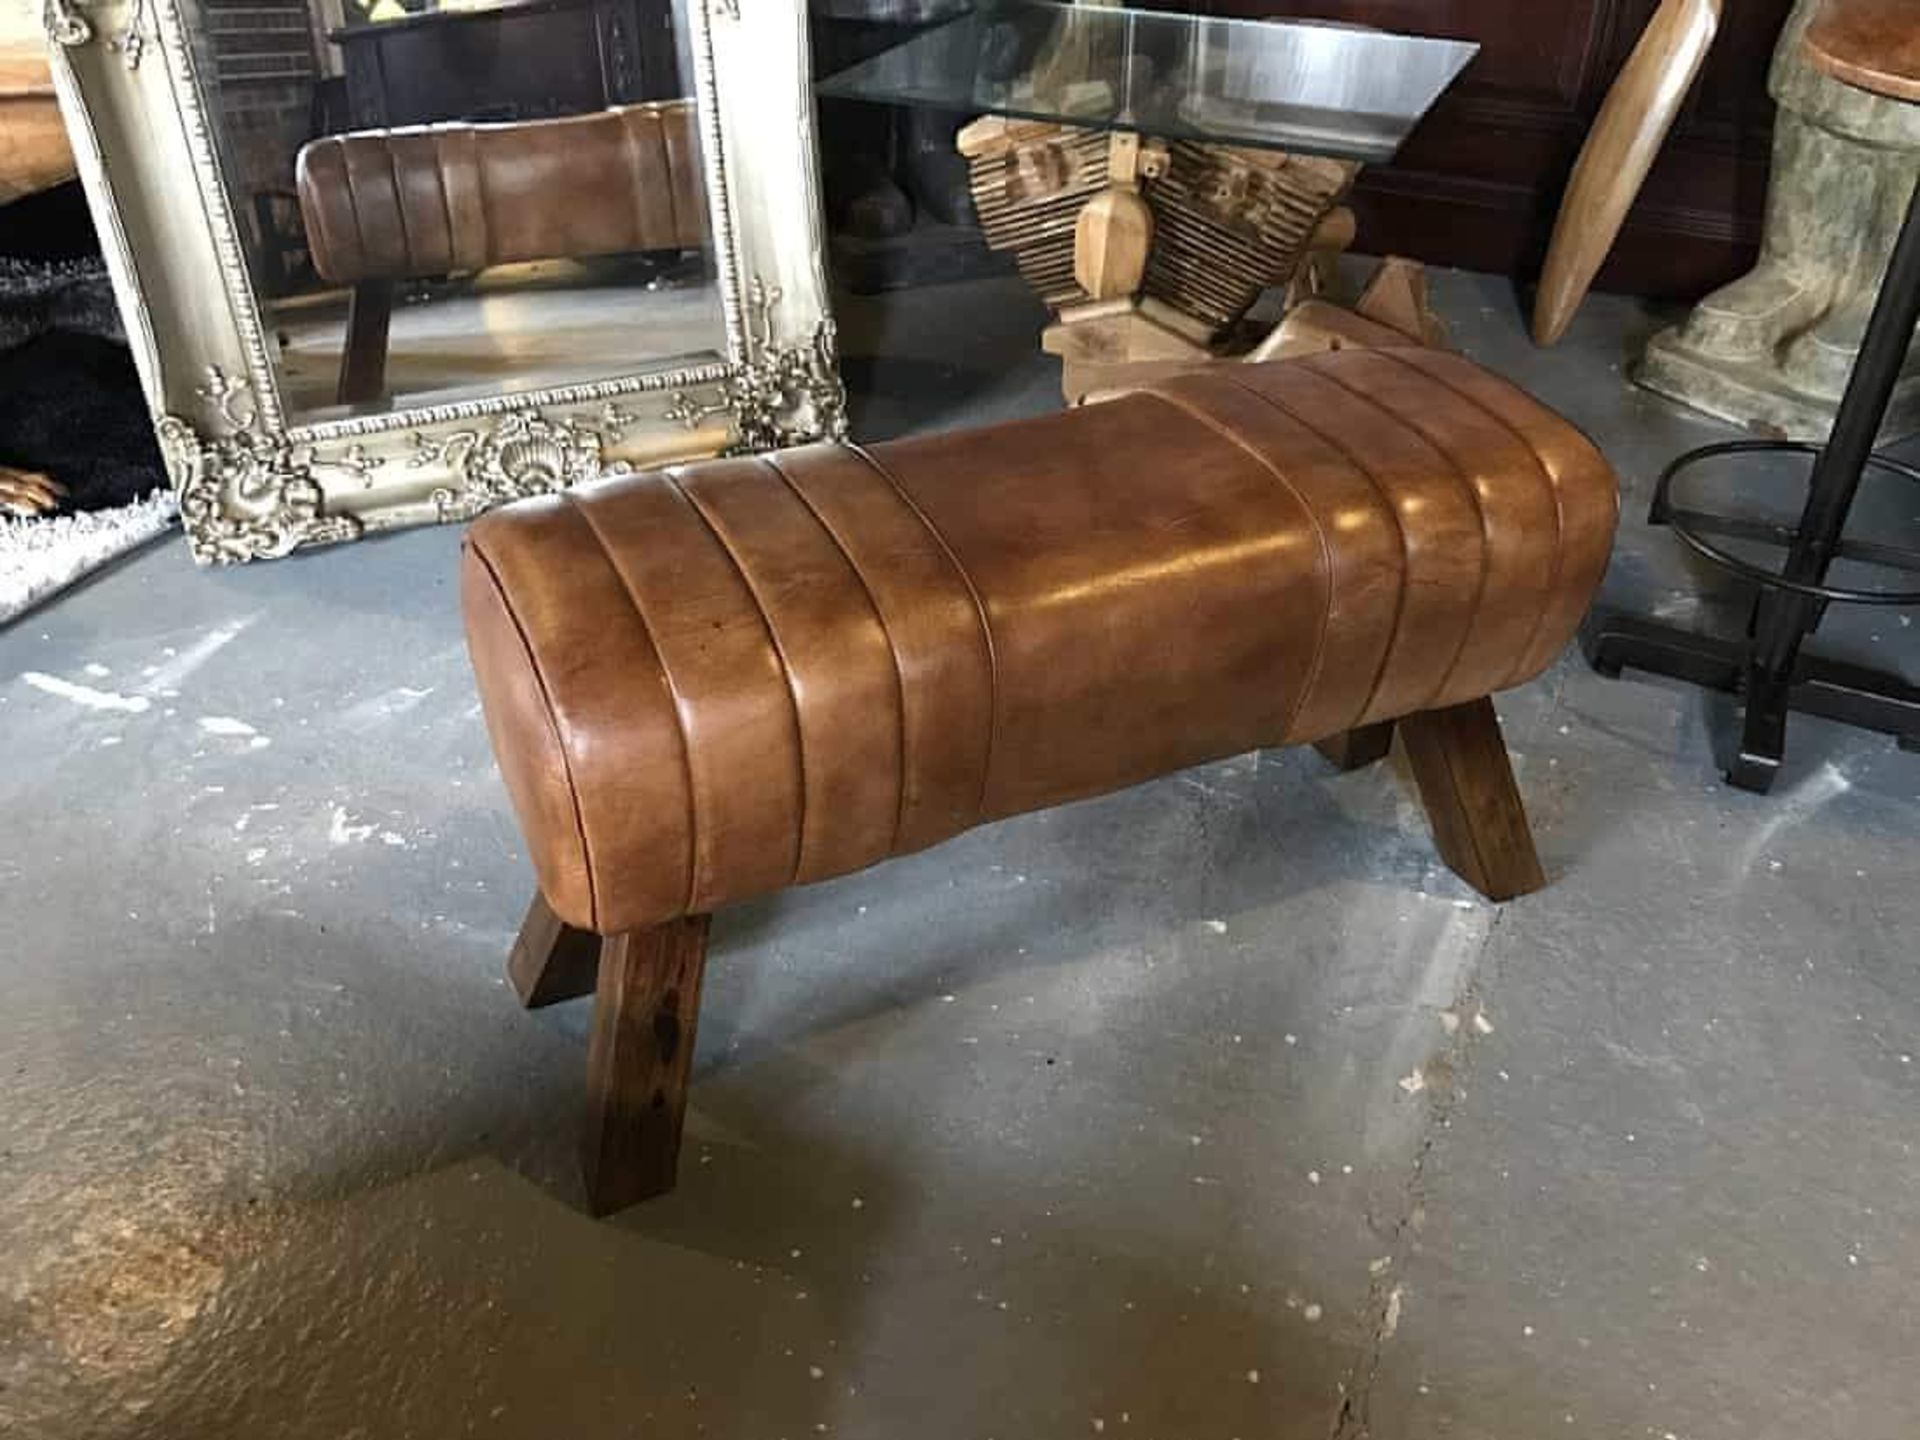 BOXED NEW LARGE LEATHER POMMEL HORSE IN TAN